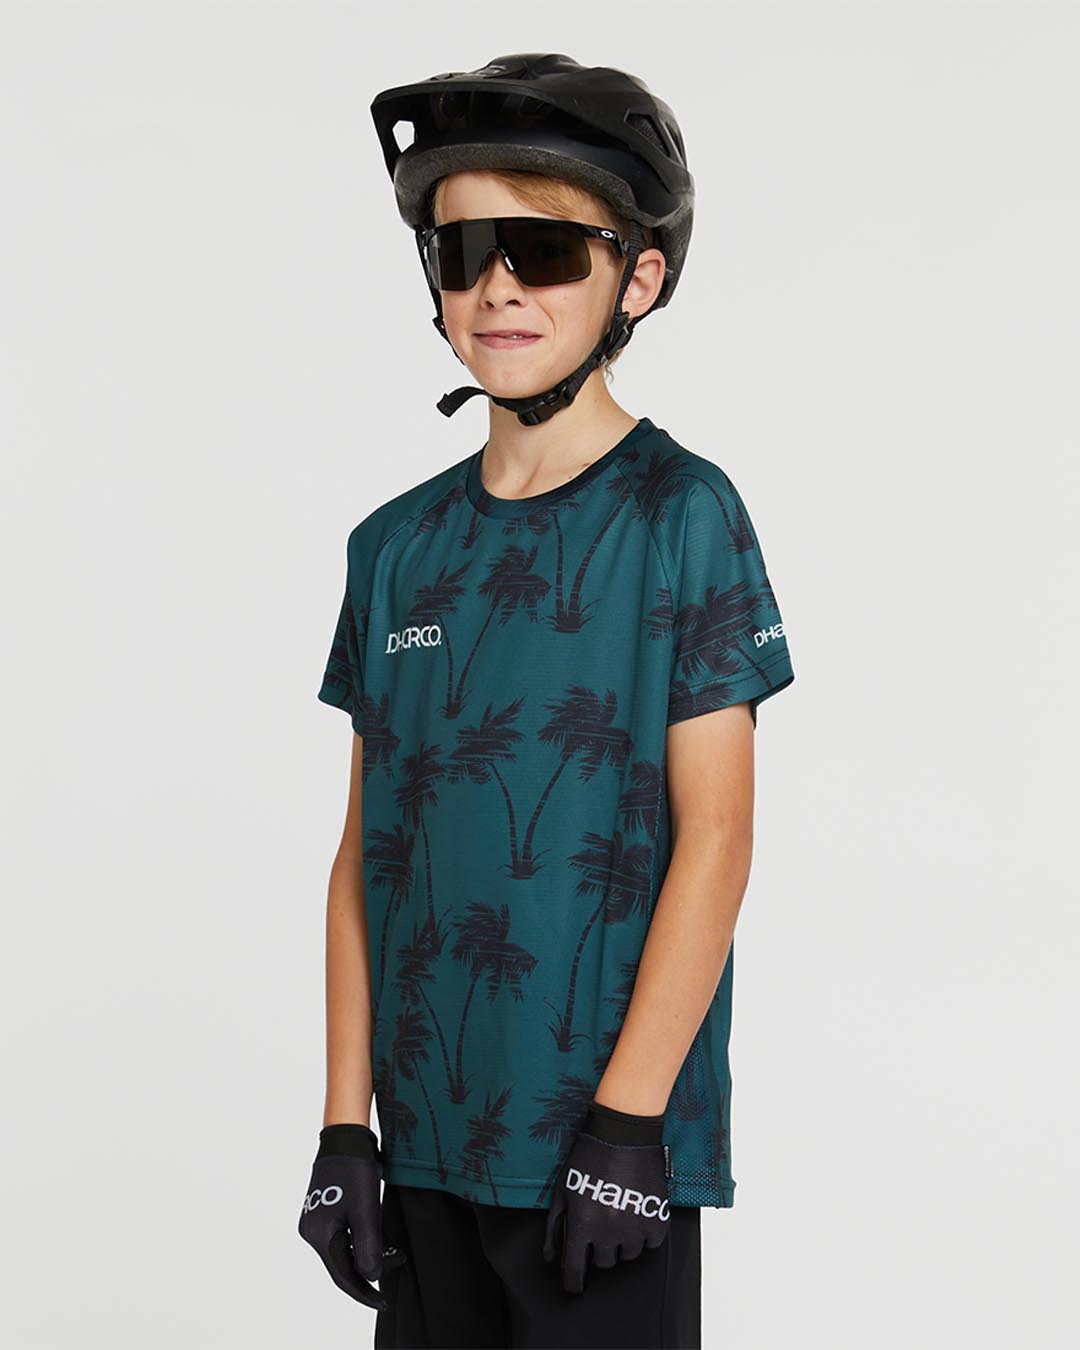 Youth Short Sleeve Jersey | Dust Til Dawn